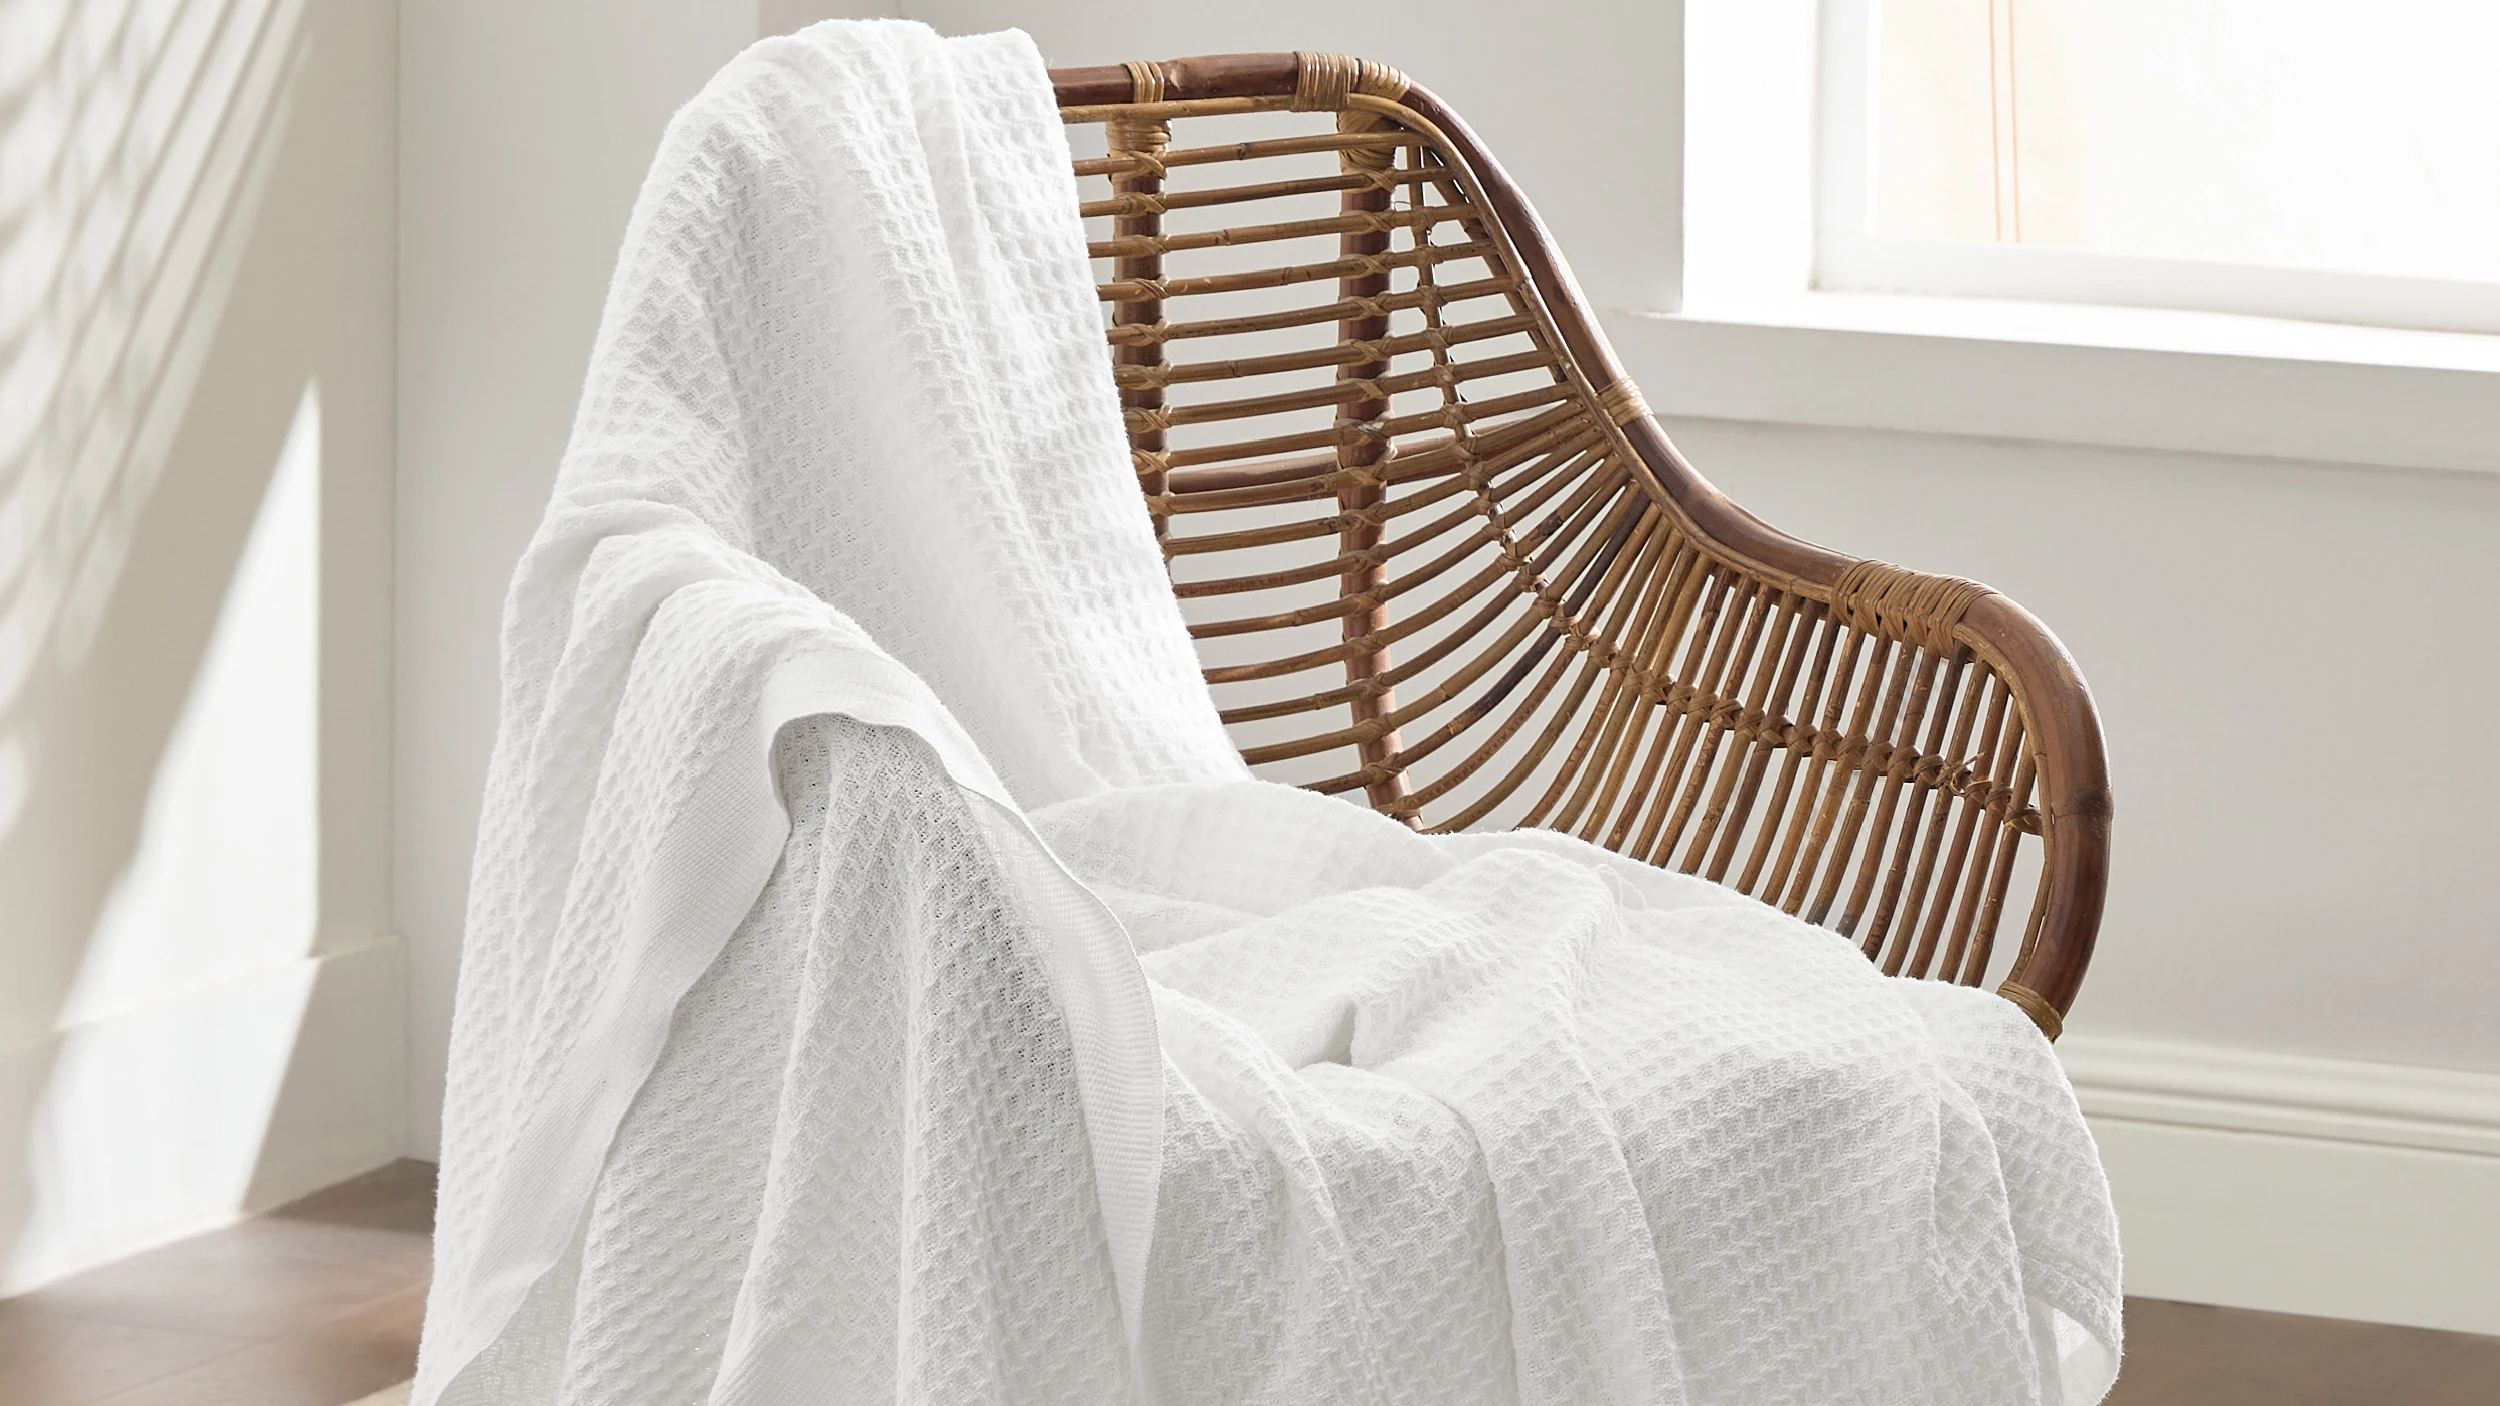 Bedsure 100% Cotton Blankets Queen White - Waffle Weave Blankets for All  Seasons, 90x90 inches